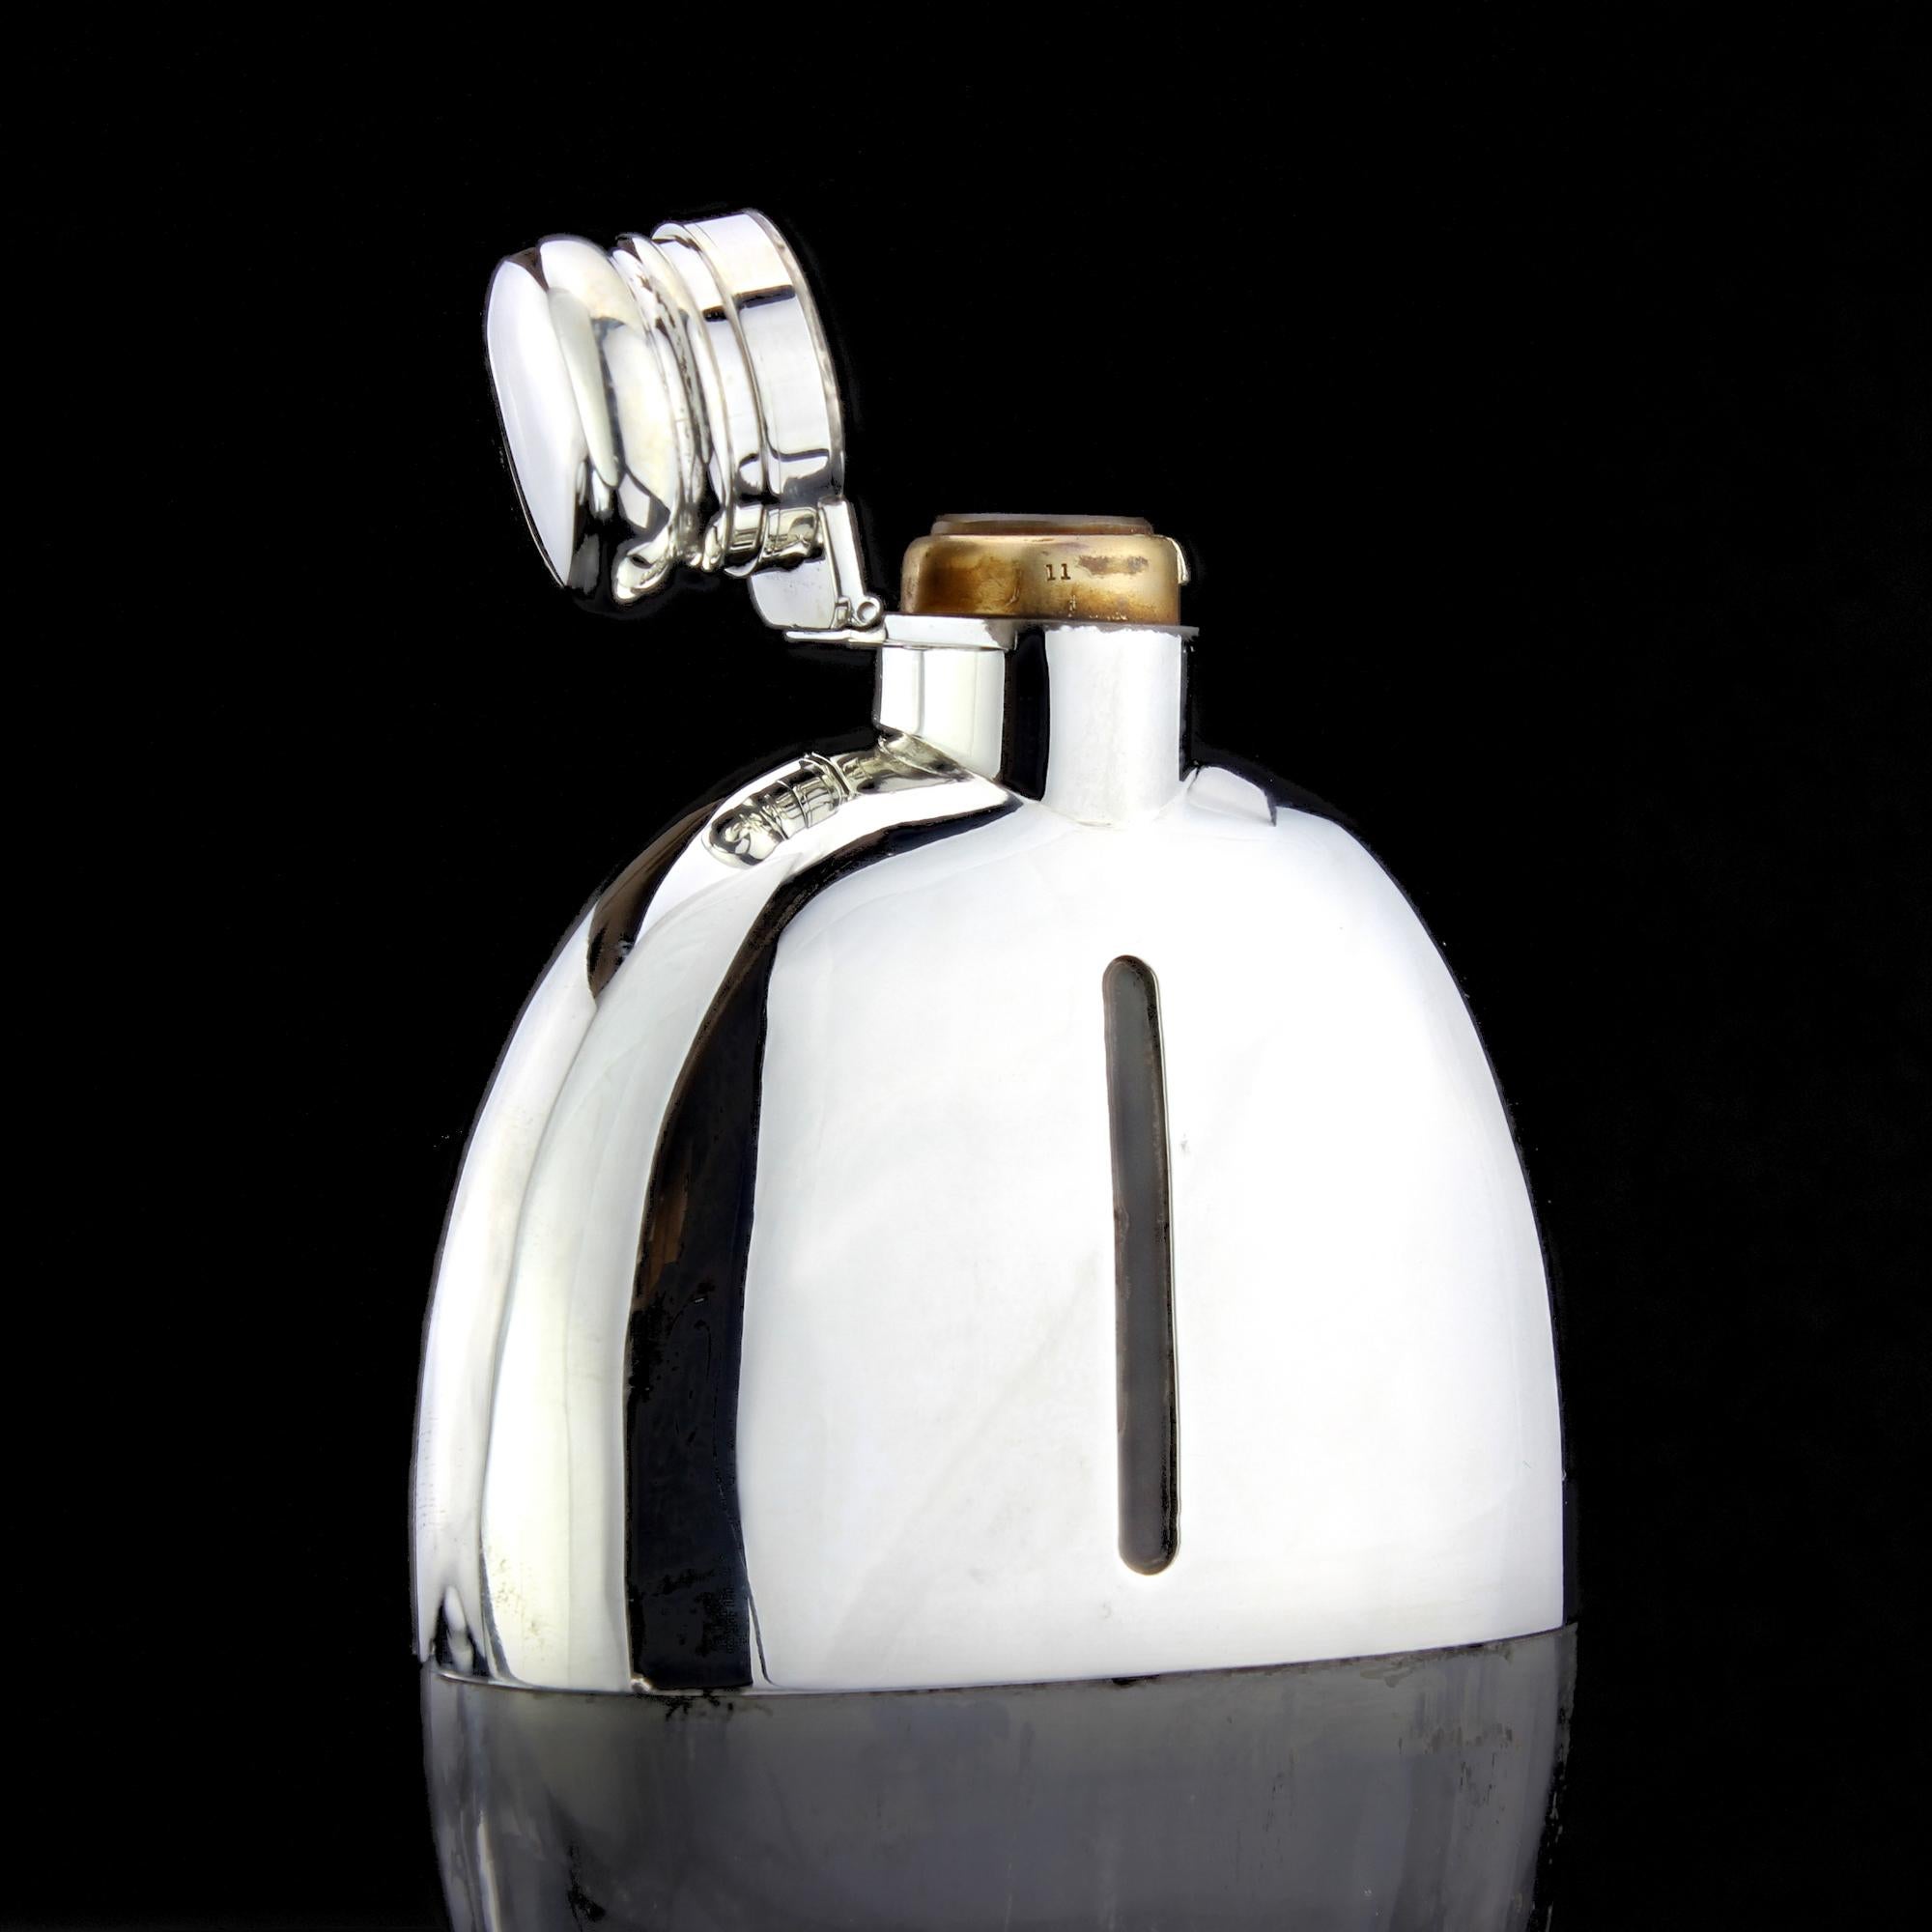 Late 19th Century Antique Victorian Silver Flask, Sampson Mordan & Co, London, 1892 For Sale